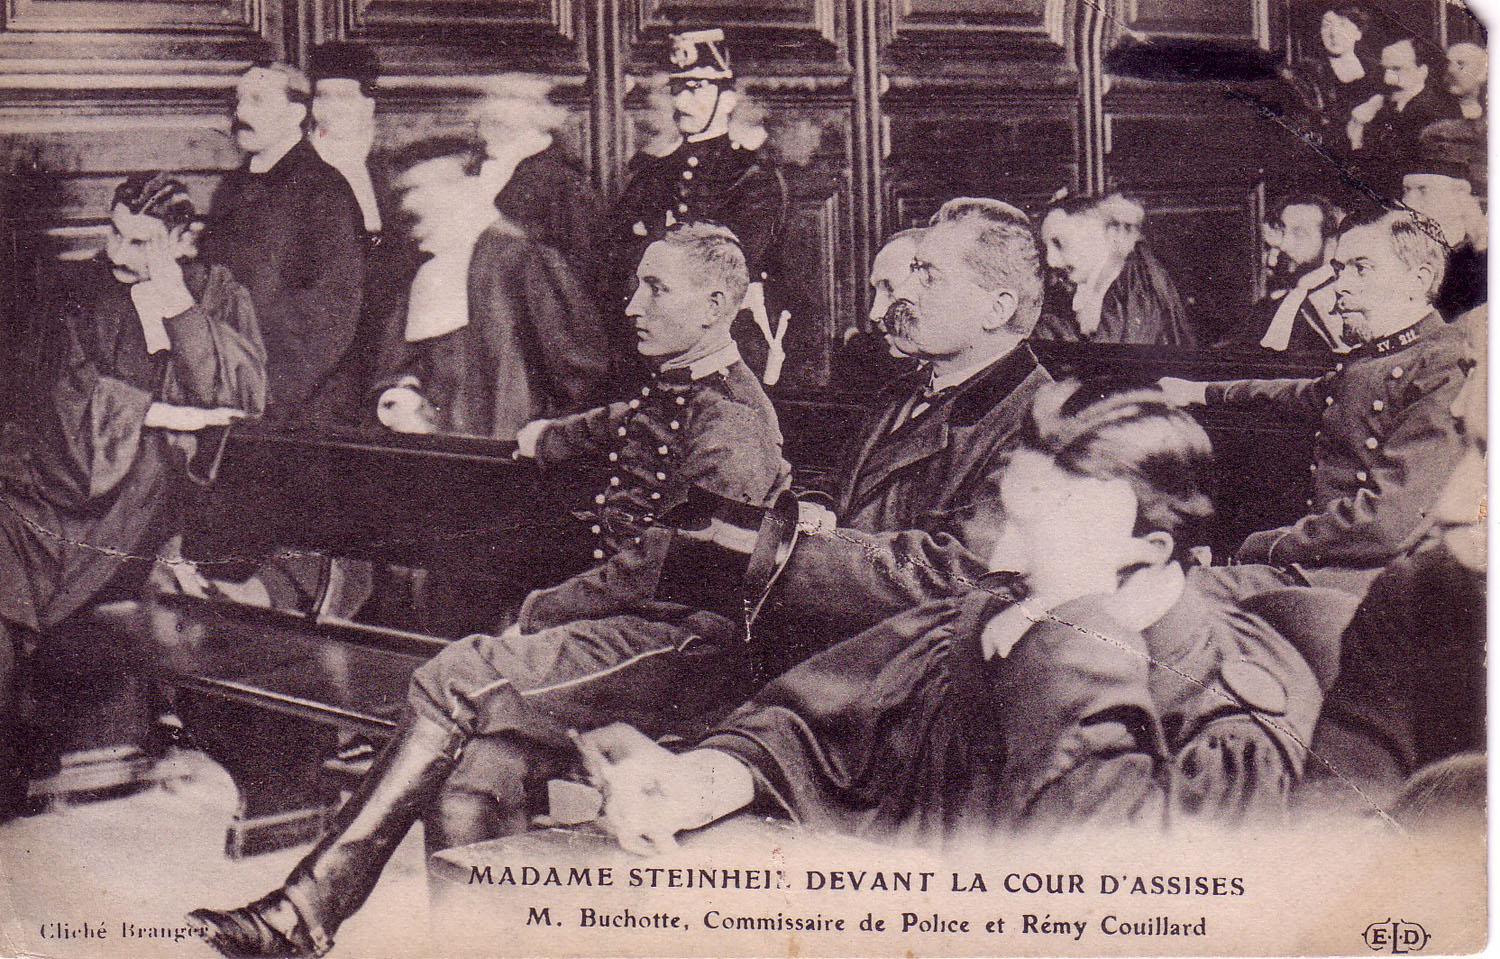 Madame Steinheil’s trial at the Court of Assises